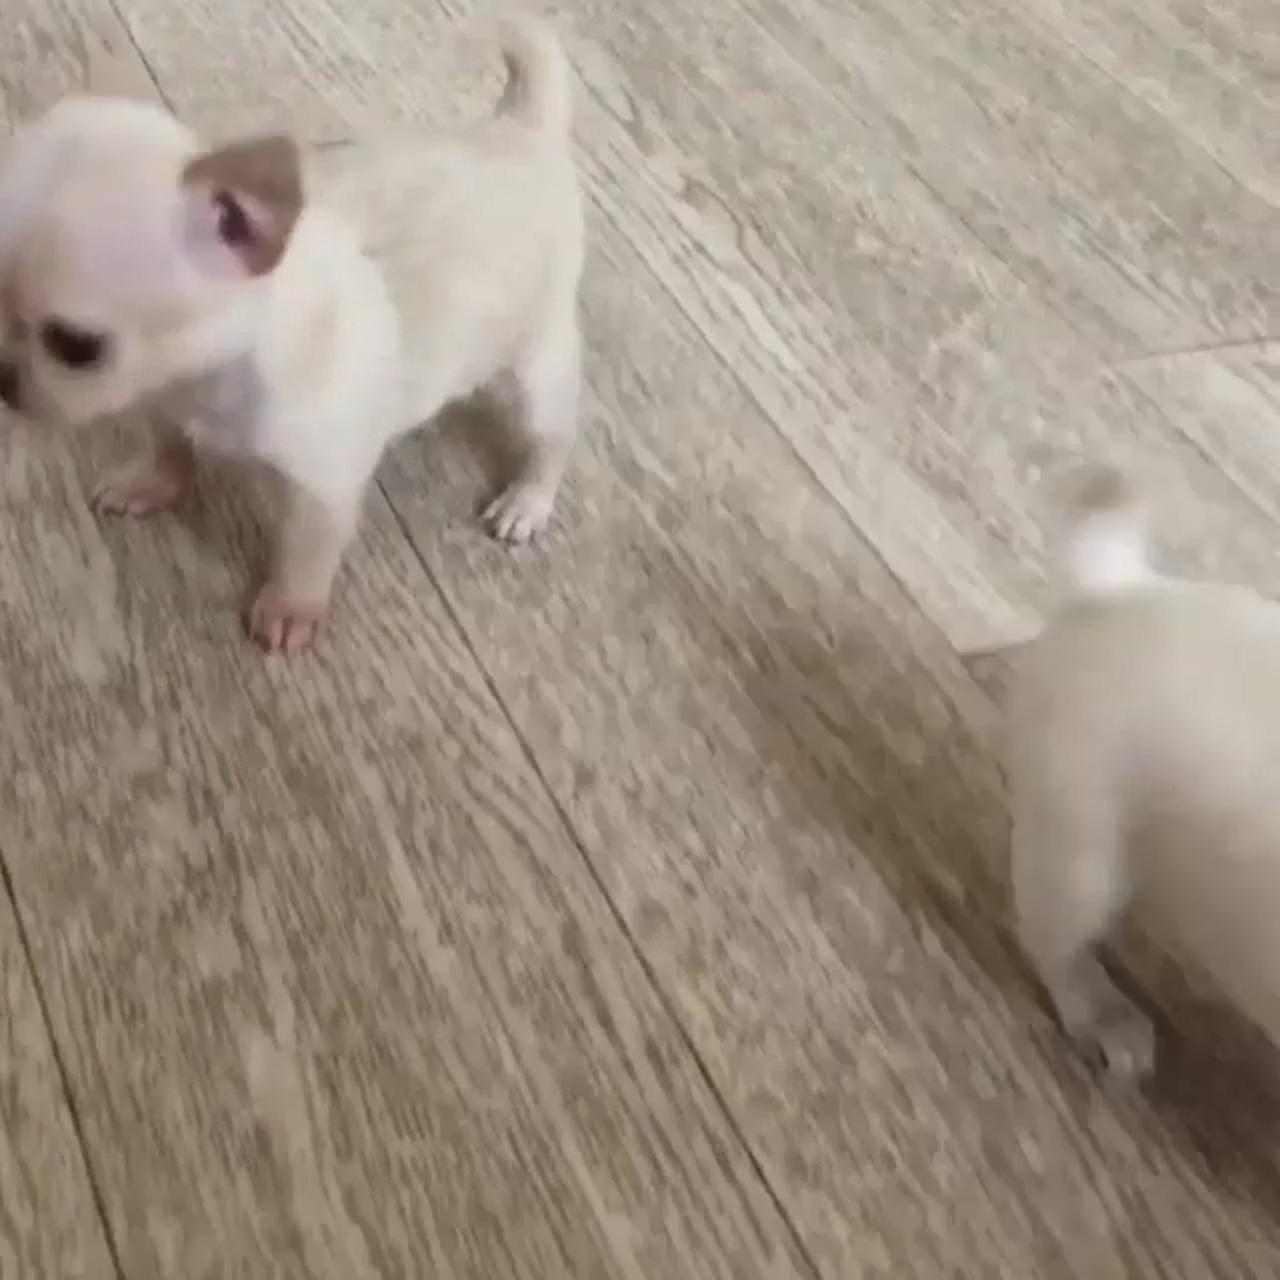 Two cute puppies; cute little animals